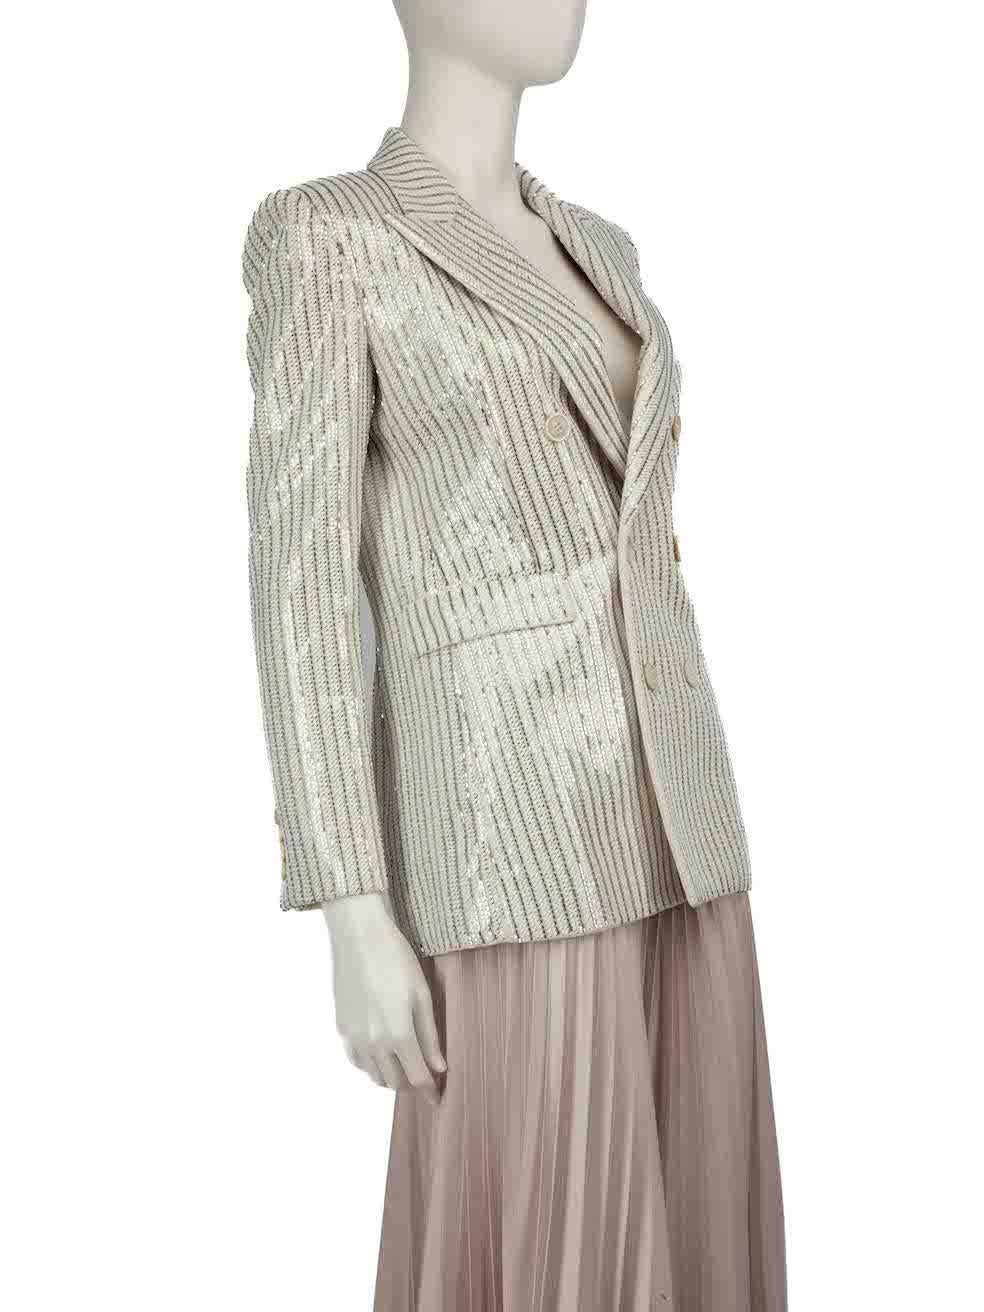 CONDITION is Very good. Hardly any visible wear to the jacket is evident on this used Saint Laurent designer resale item.
 
 
 
 Details
 
 
 White
 
 Wool
 
 Blazer
 
 Silver beaded striped pattern
 
 Shoulder pads
 
 Double breasted
 
 Button up